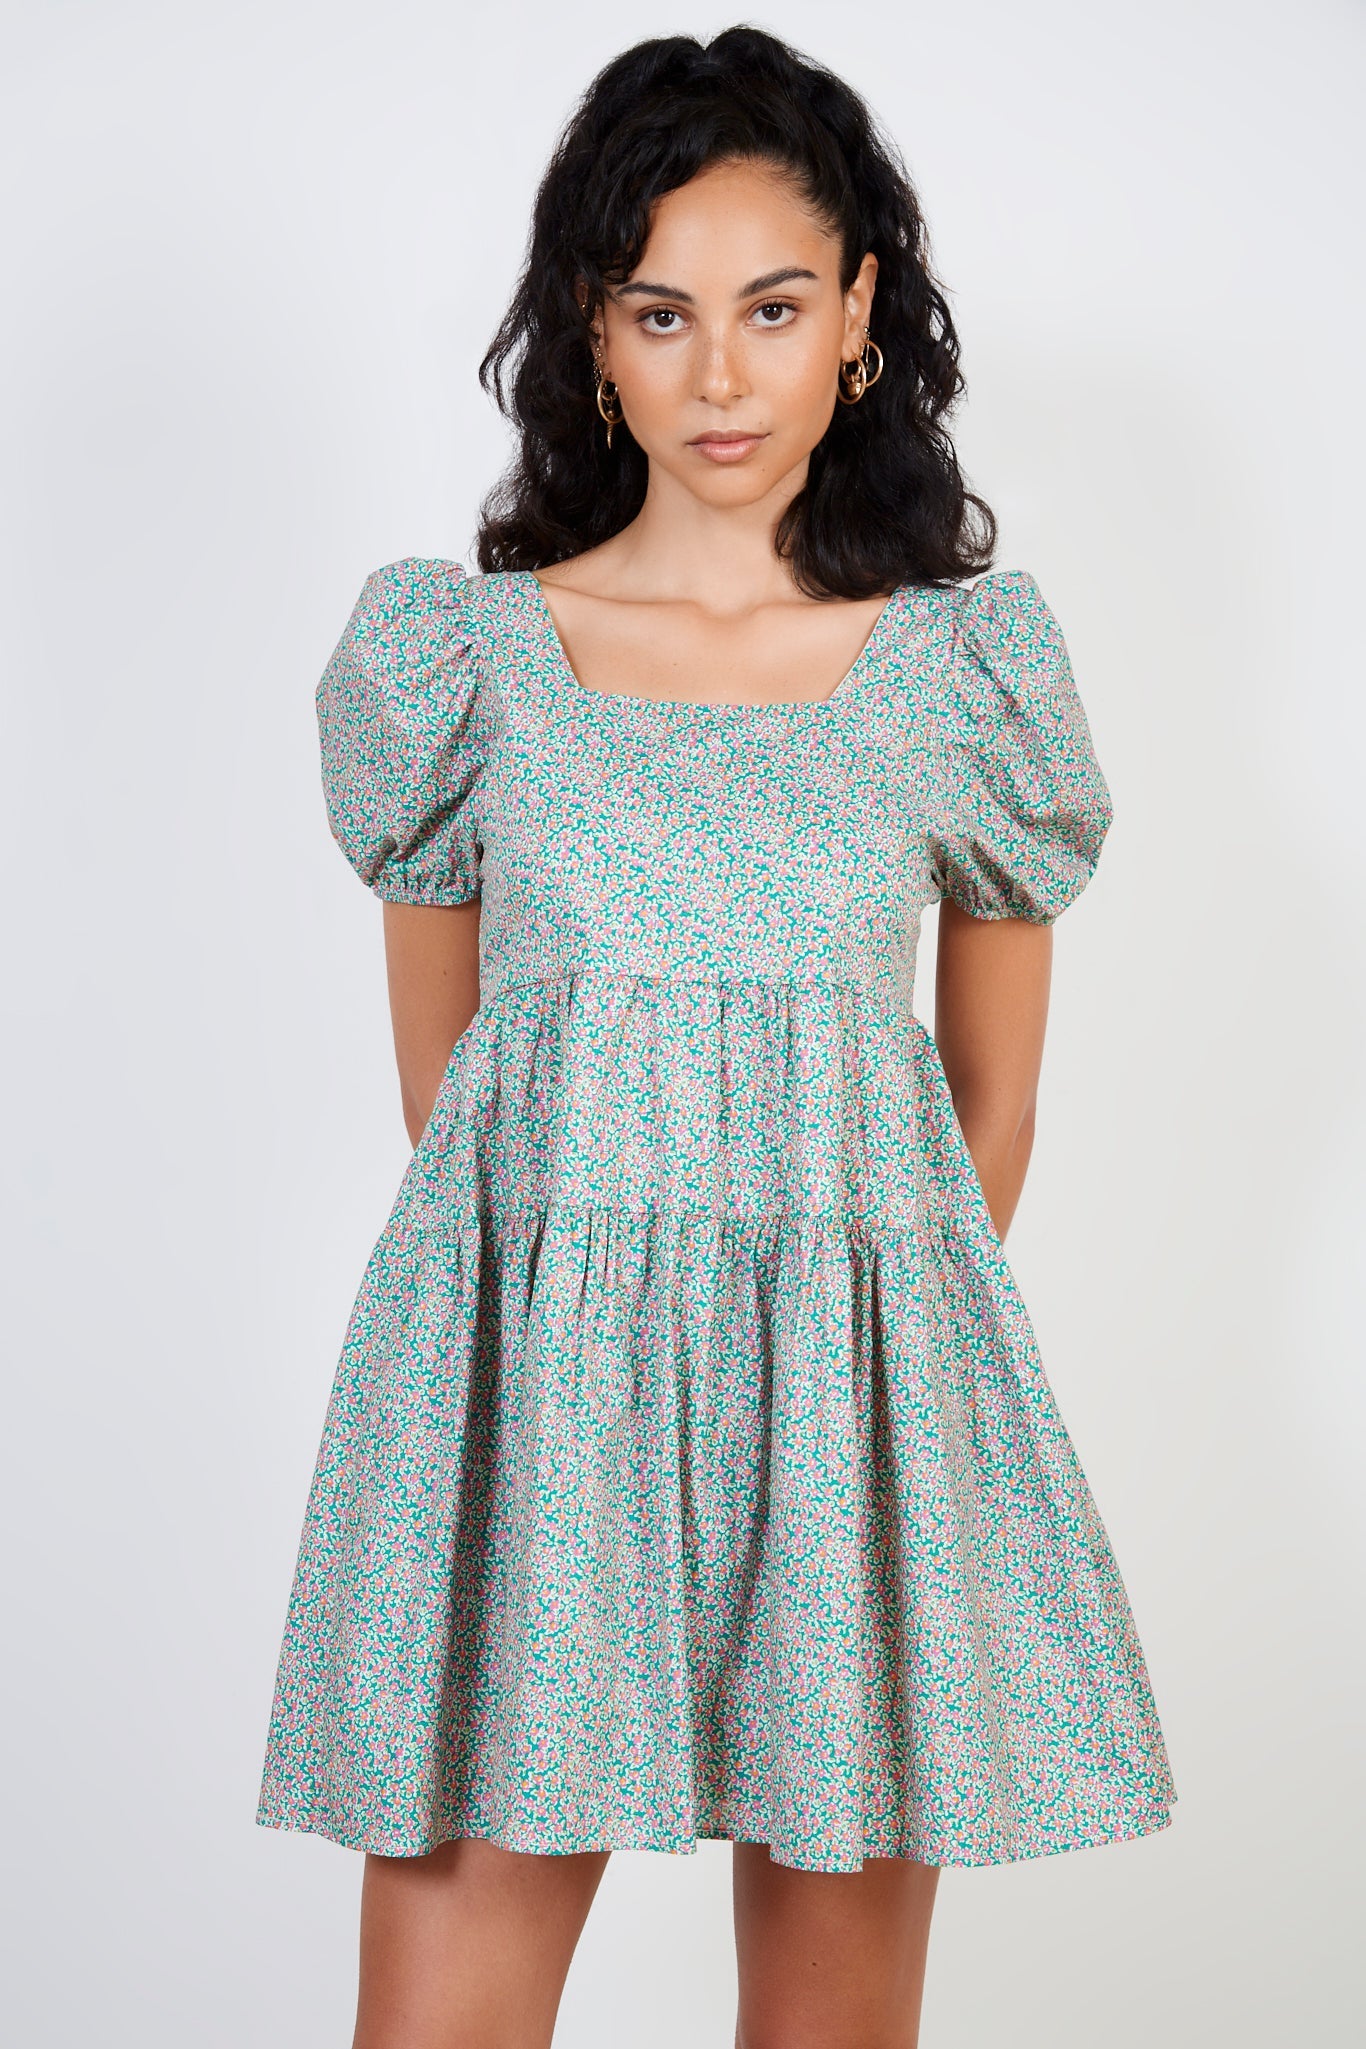 Green and pink ditsy floral print tie back dress